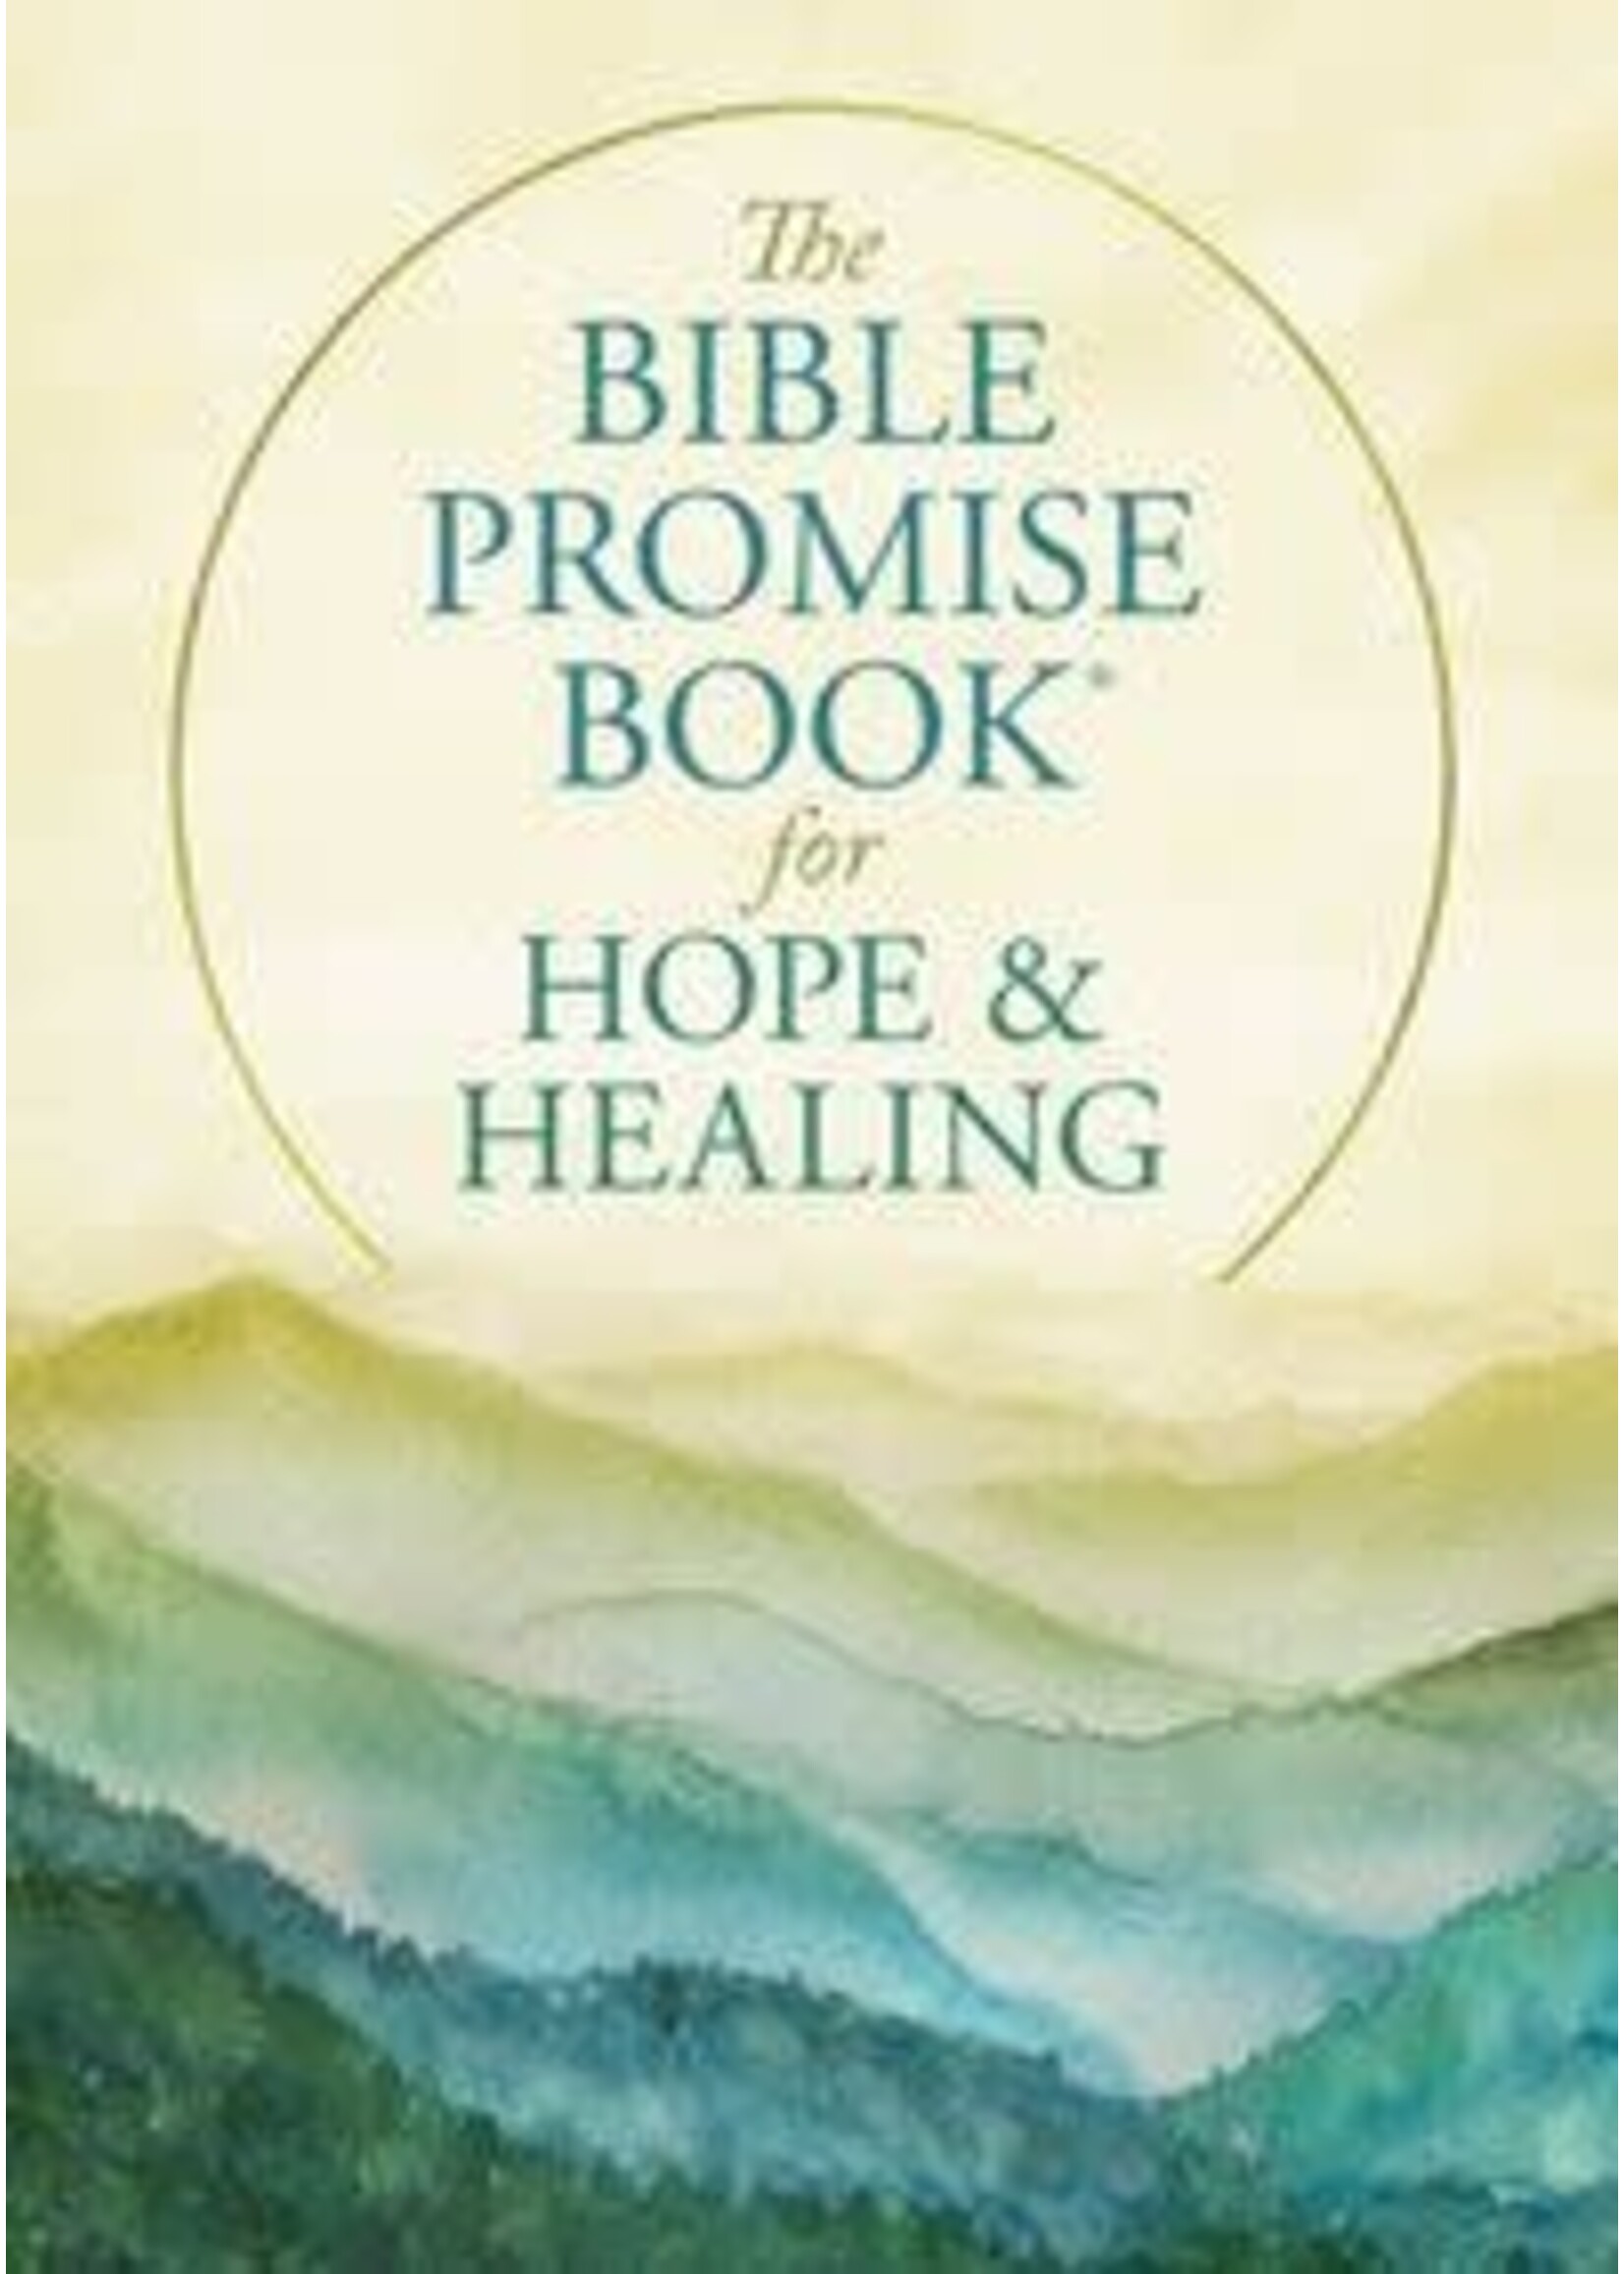 The Bible Promise Book for Hope & Healing